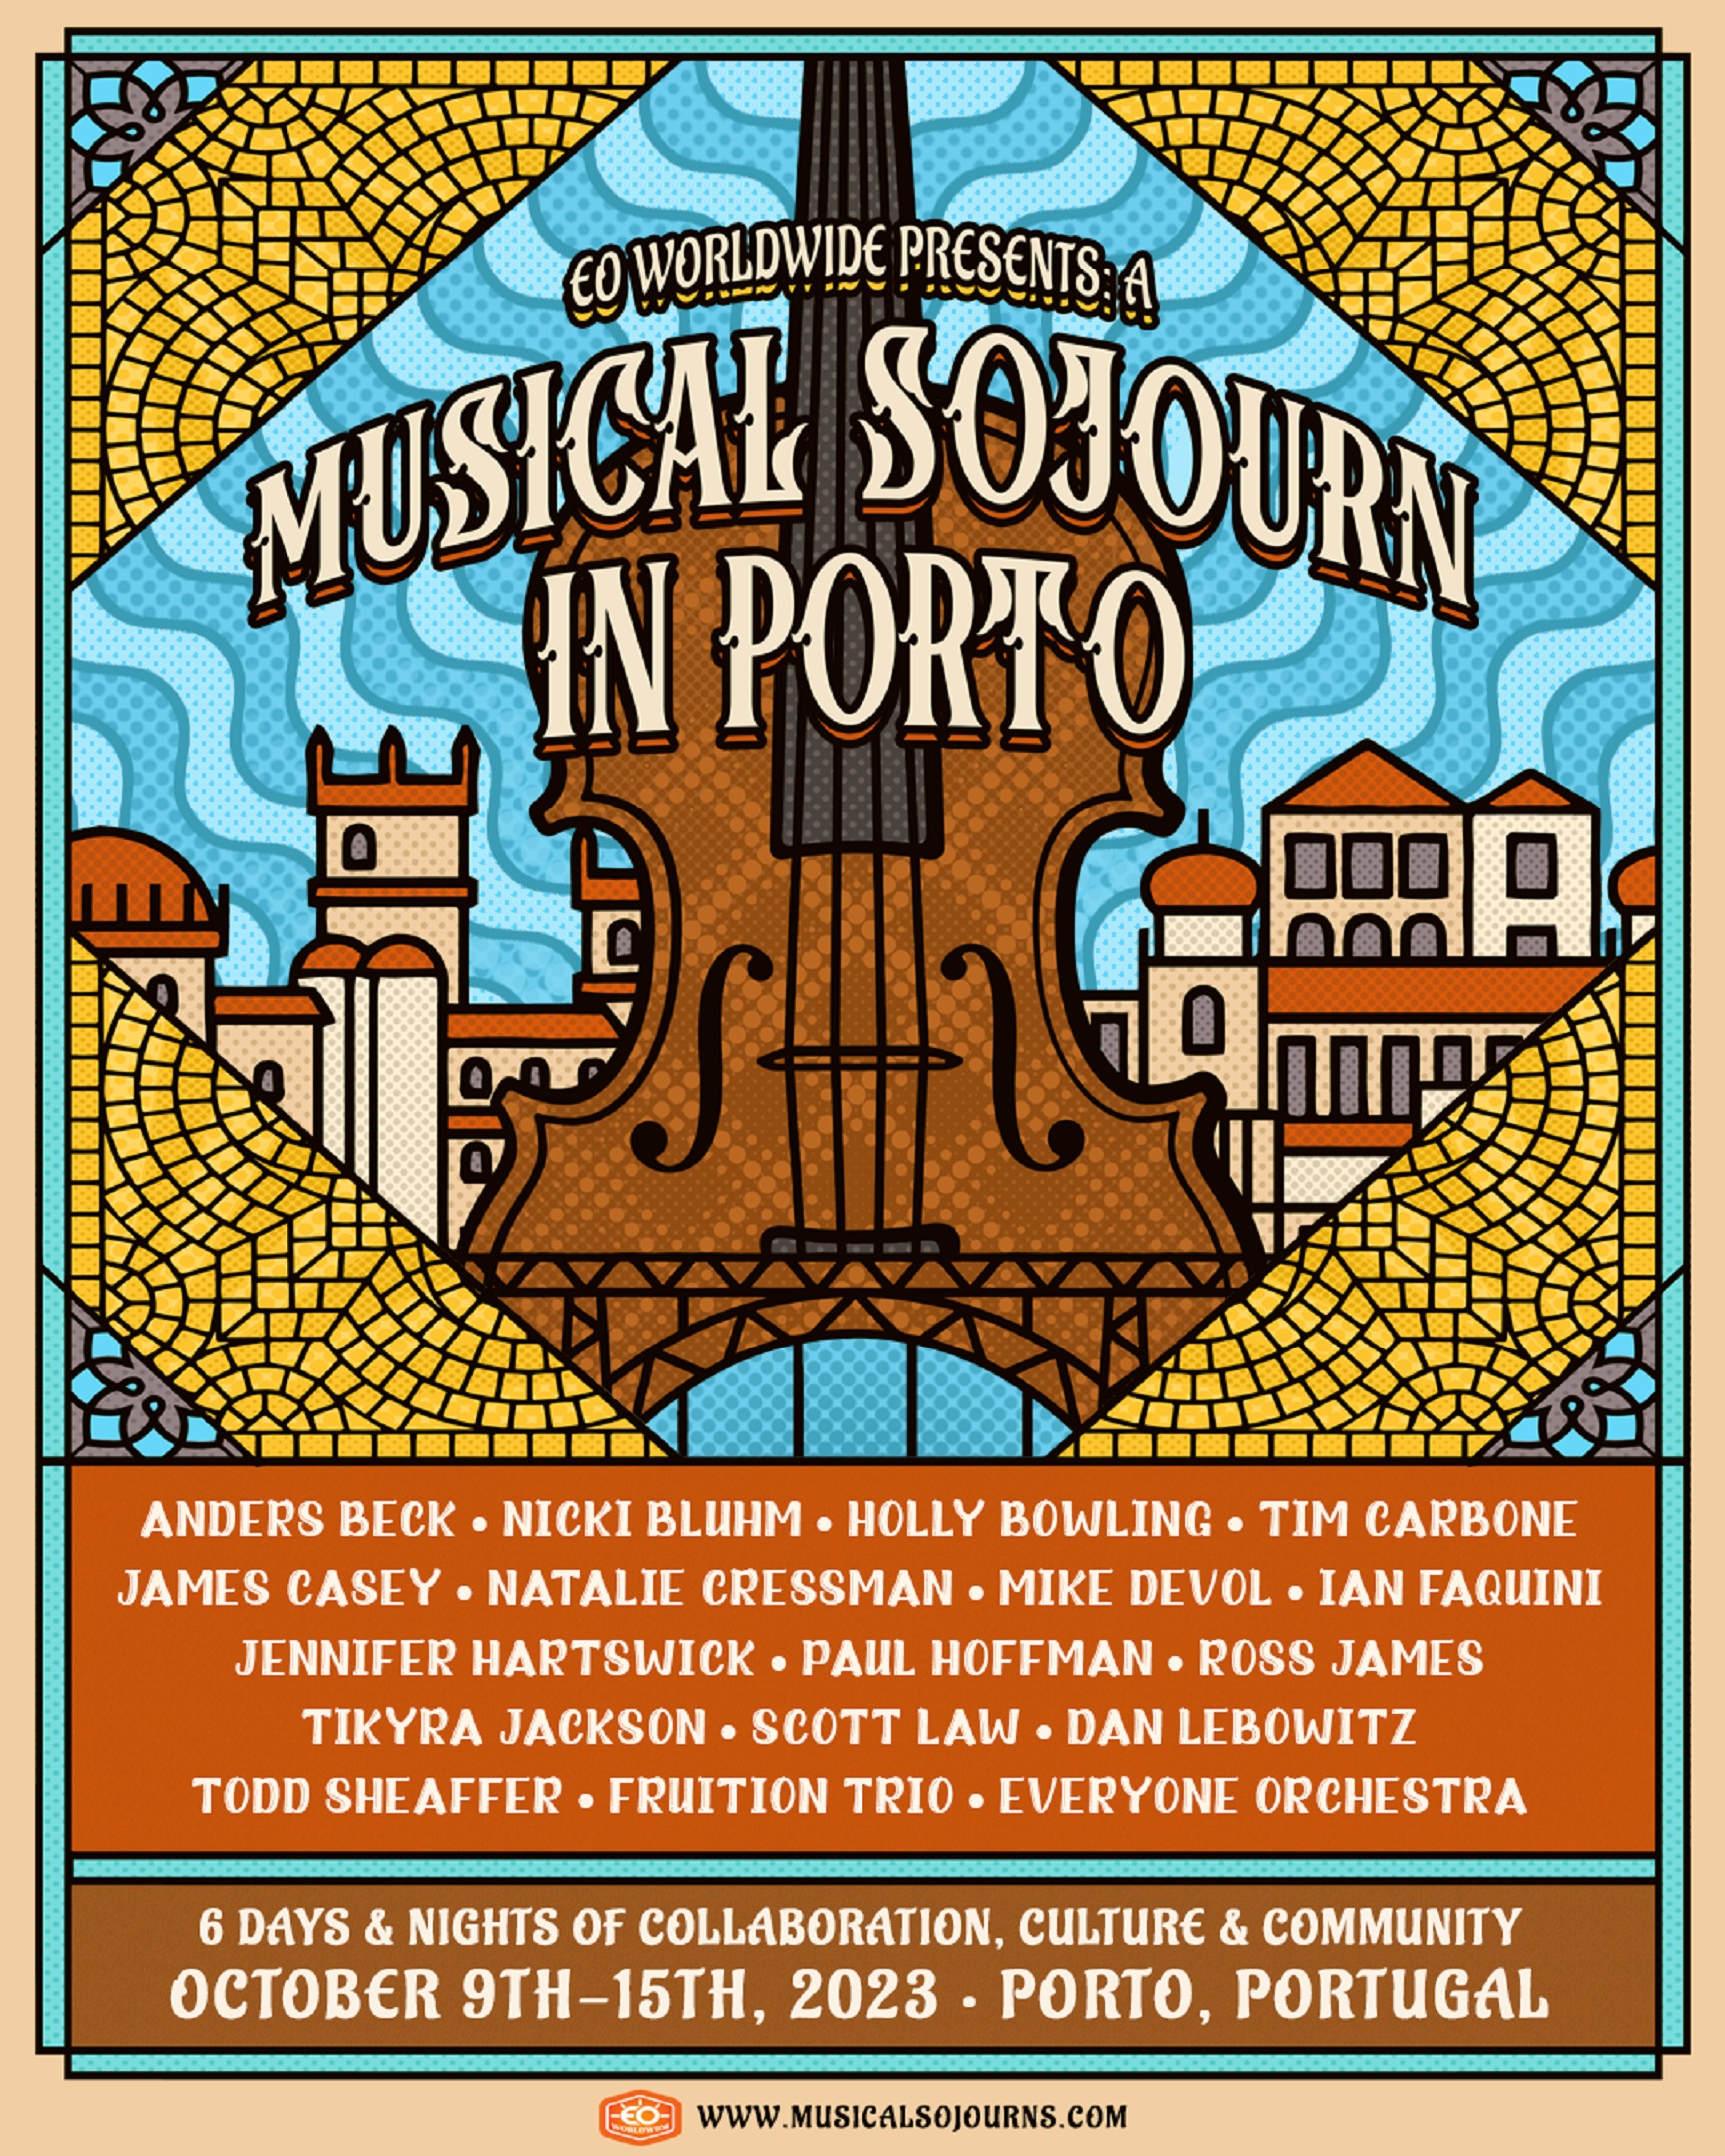 ­­­EO Worldwide Debuts with 'A Musical Sojourn in Porto’